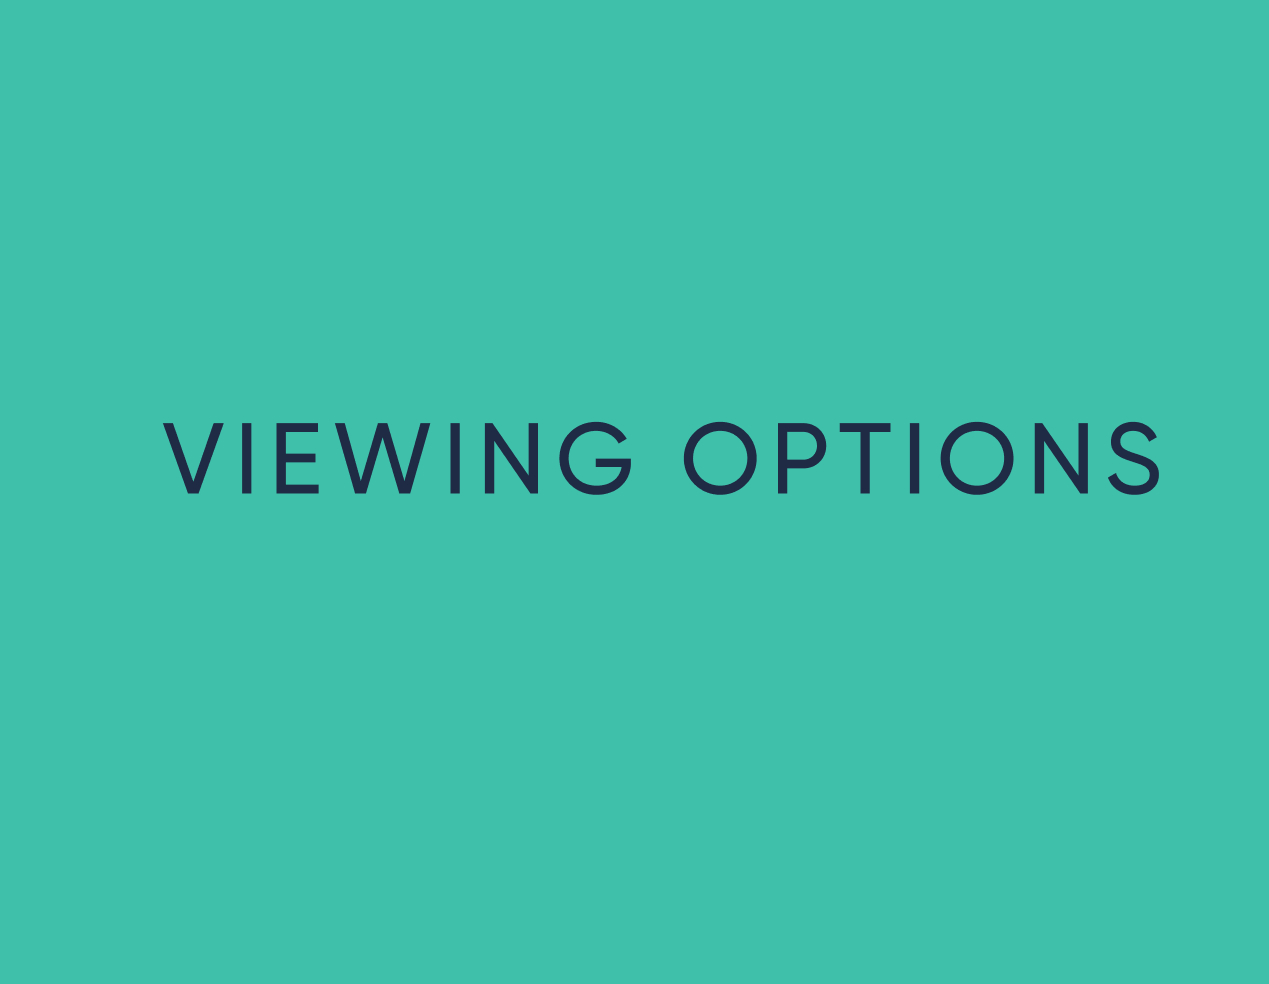 Synthetic Options - Viewing Options Through a Different Lens